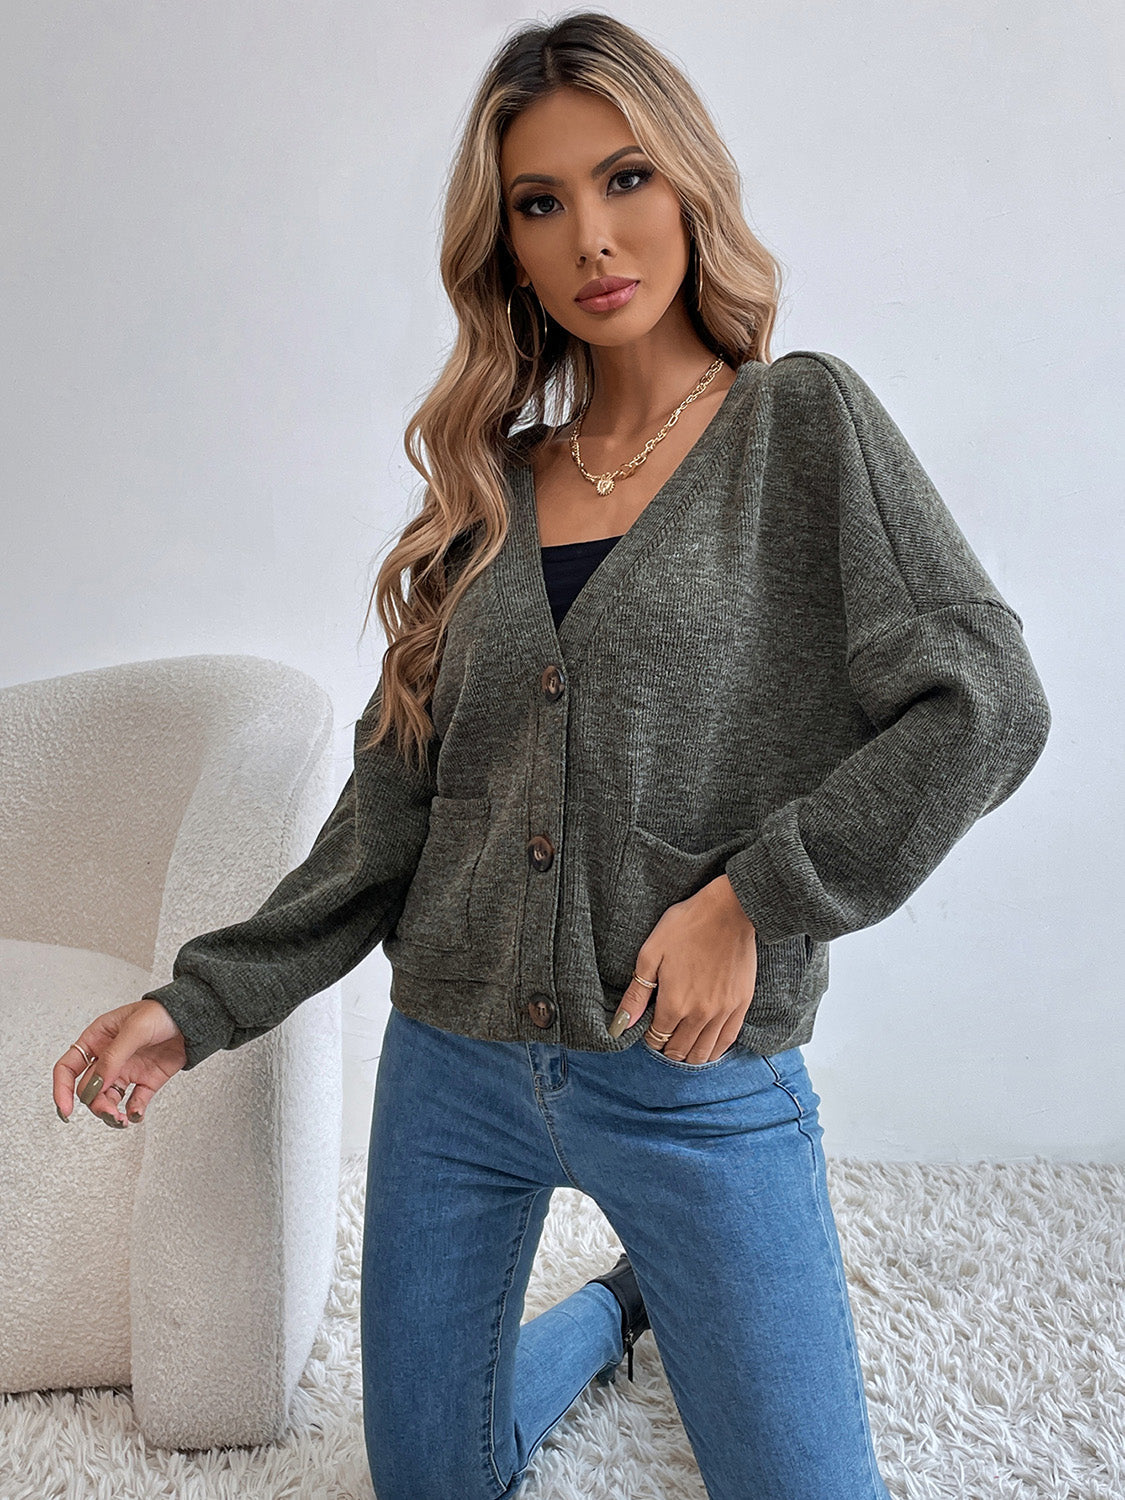 Buttoned Long Sleeve Cardigan - Women’s Clothing & Accessories - Shirts & Tops - 4 - 2024